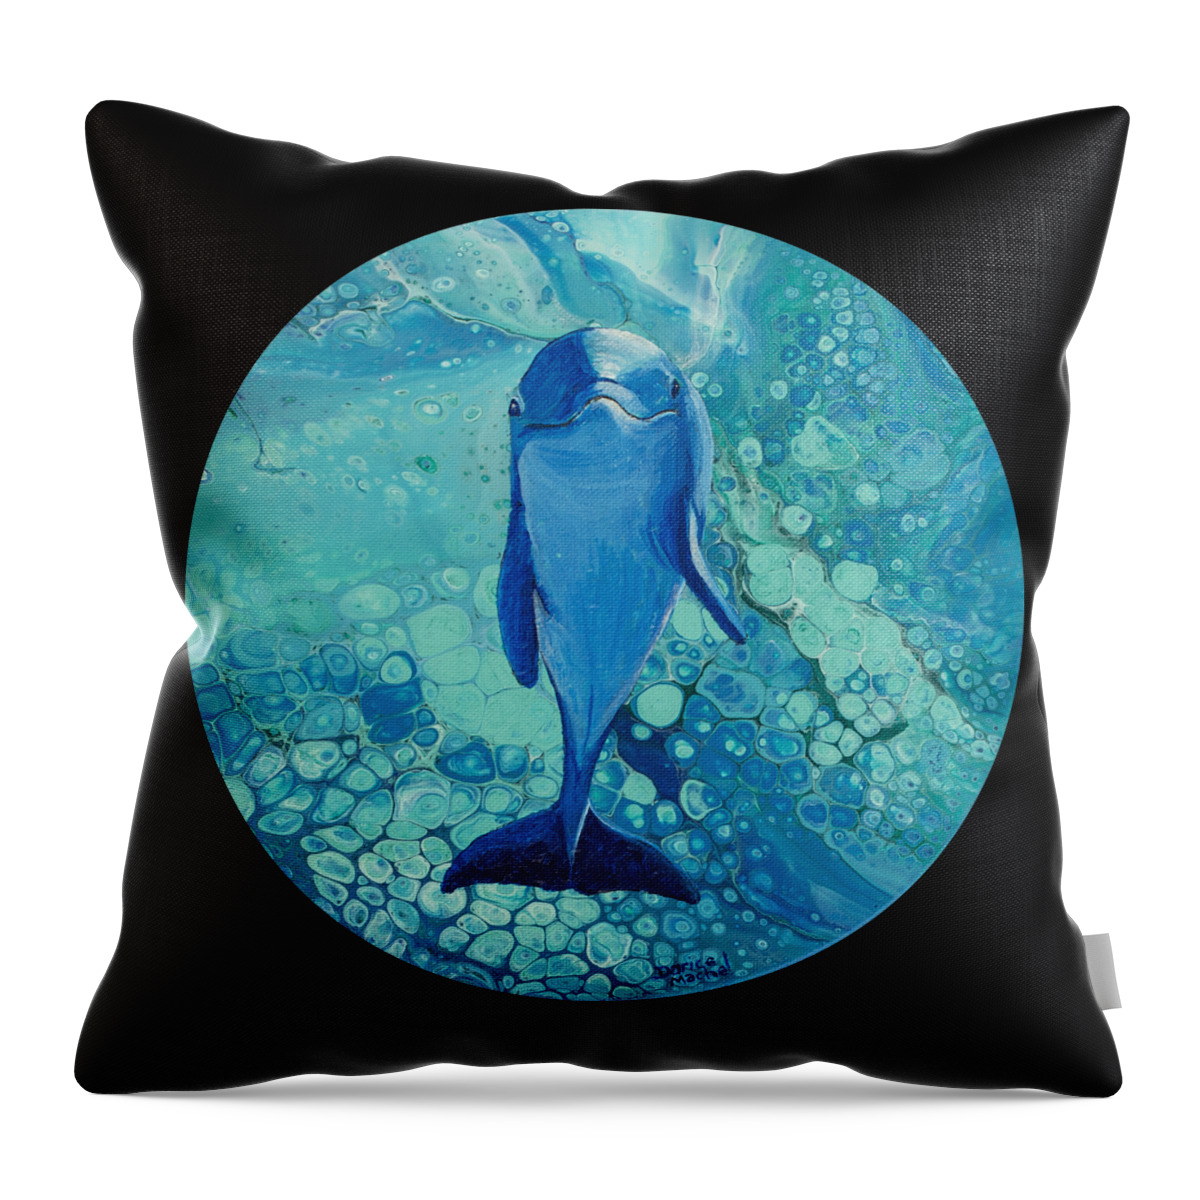 Animal Throw Pillow featuring the painting Spirit Of The Ocean On Black by Darice Machel McGuire